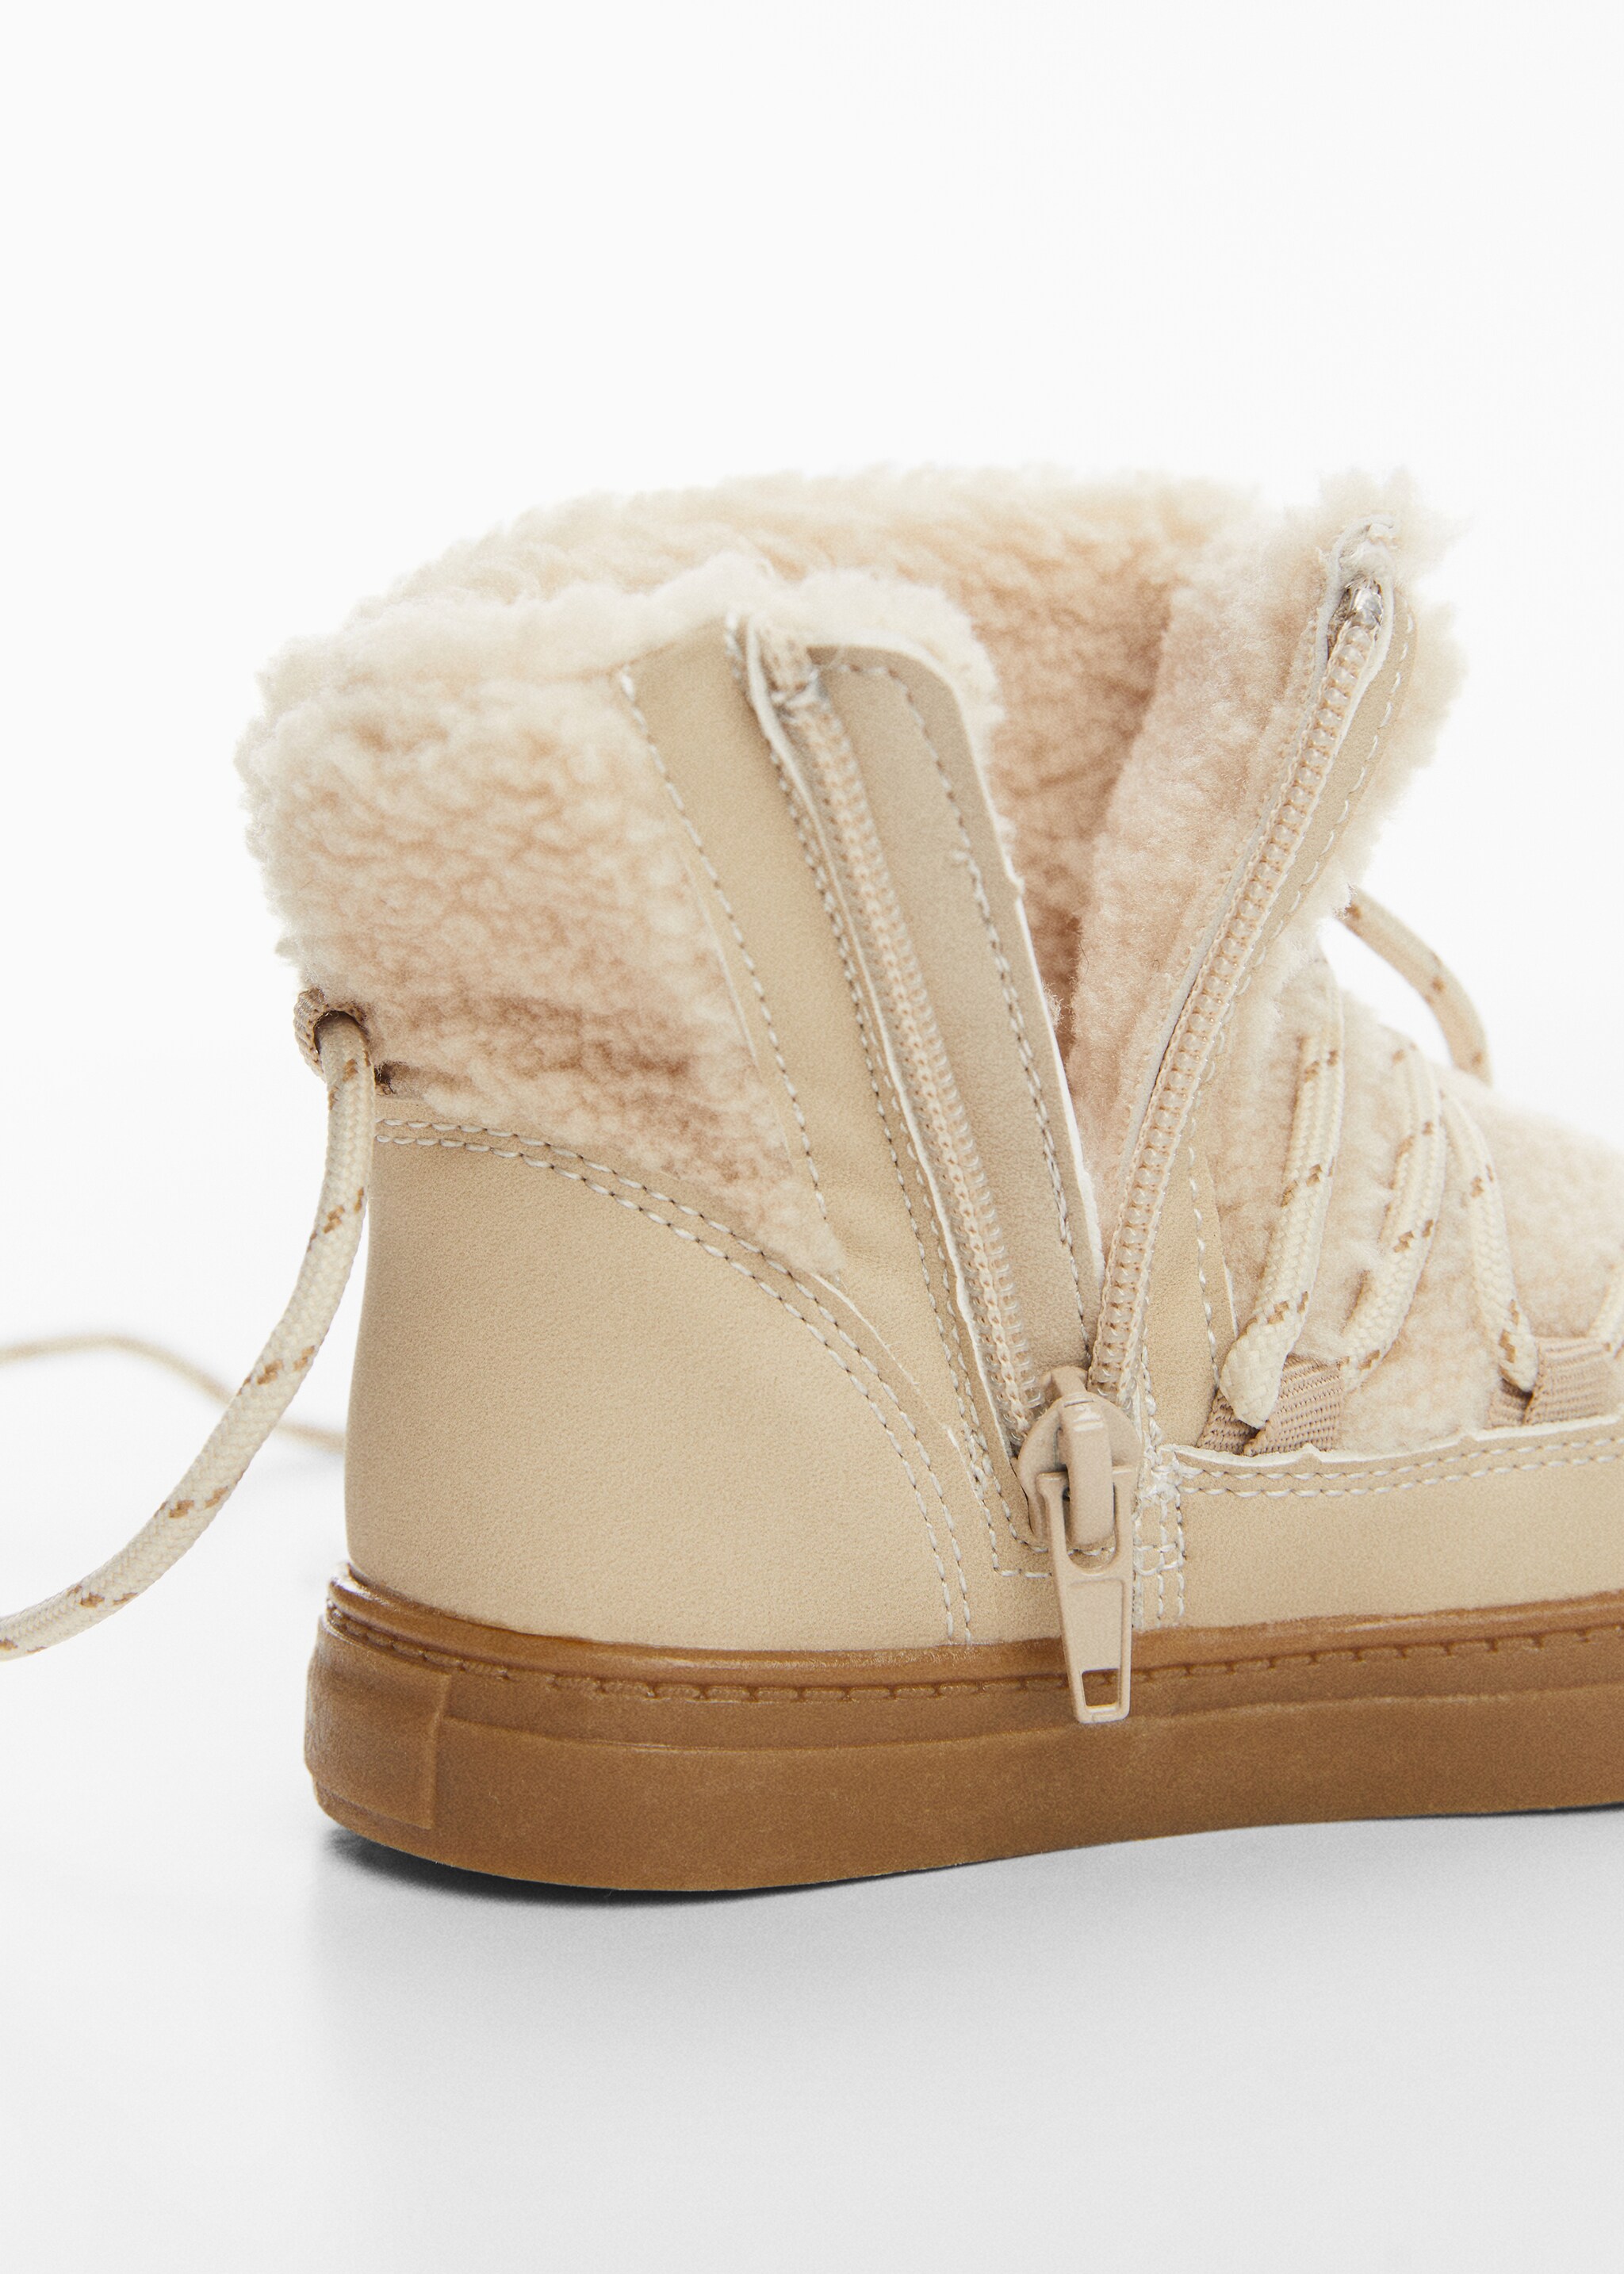 Shearling lace boots - Details of the article 3